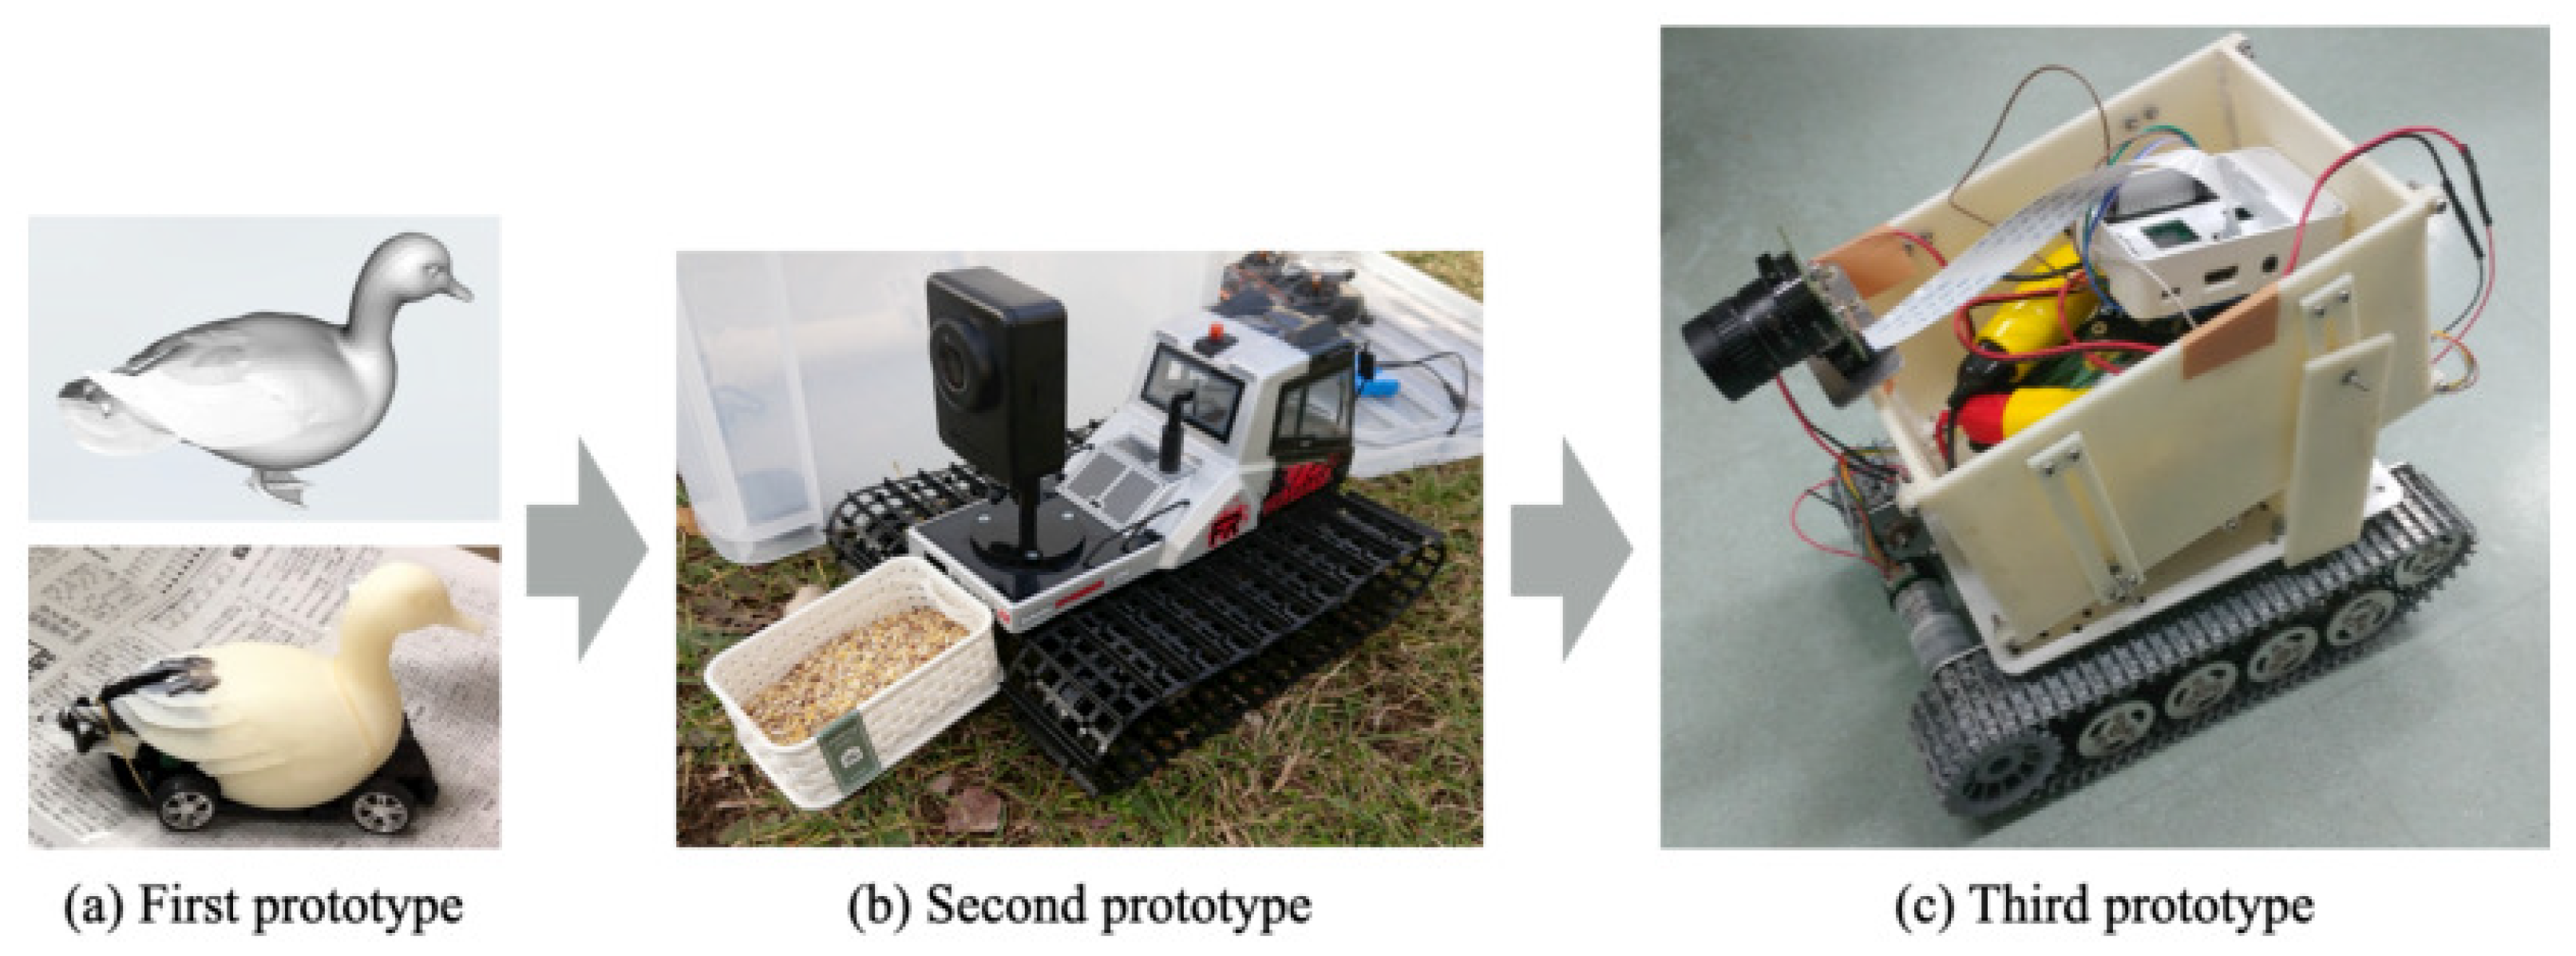 Robotics | Free Full-Text | Prototype Development of Small Mobile Robots  for Mallard Navigation in Paddy Fields: Toward Realizing Remote Farming